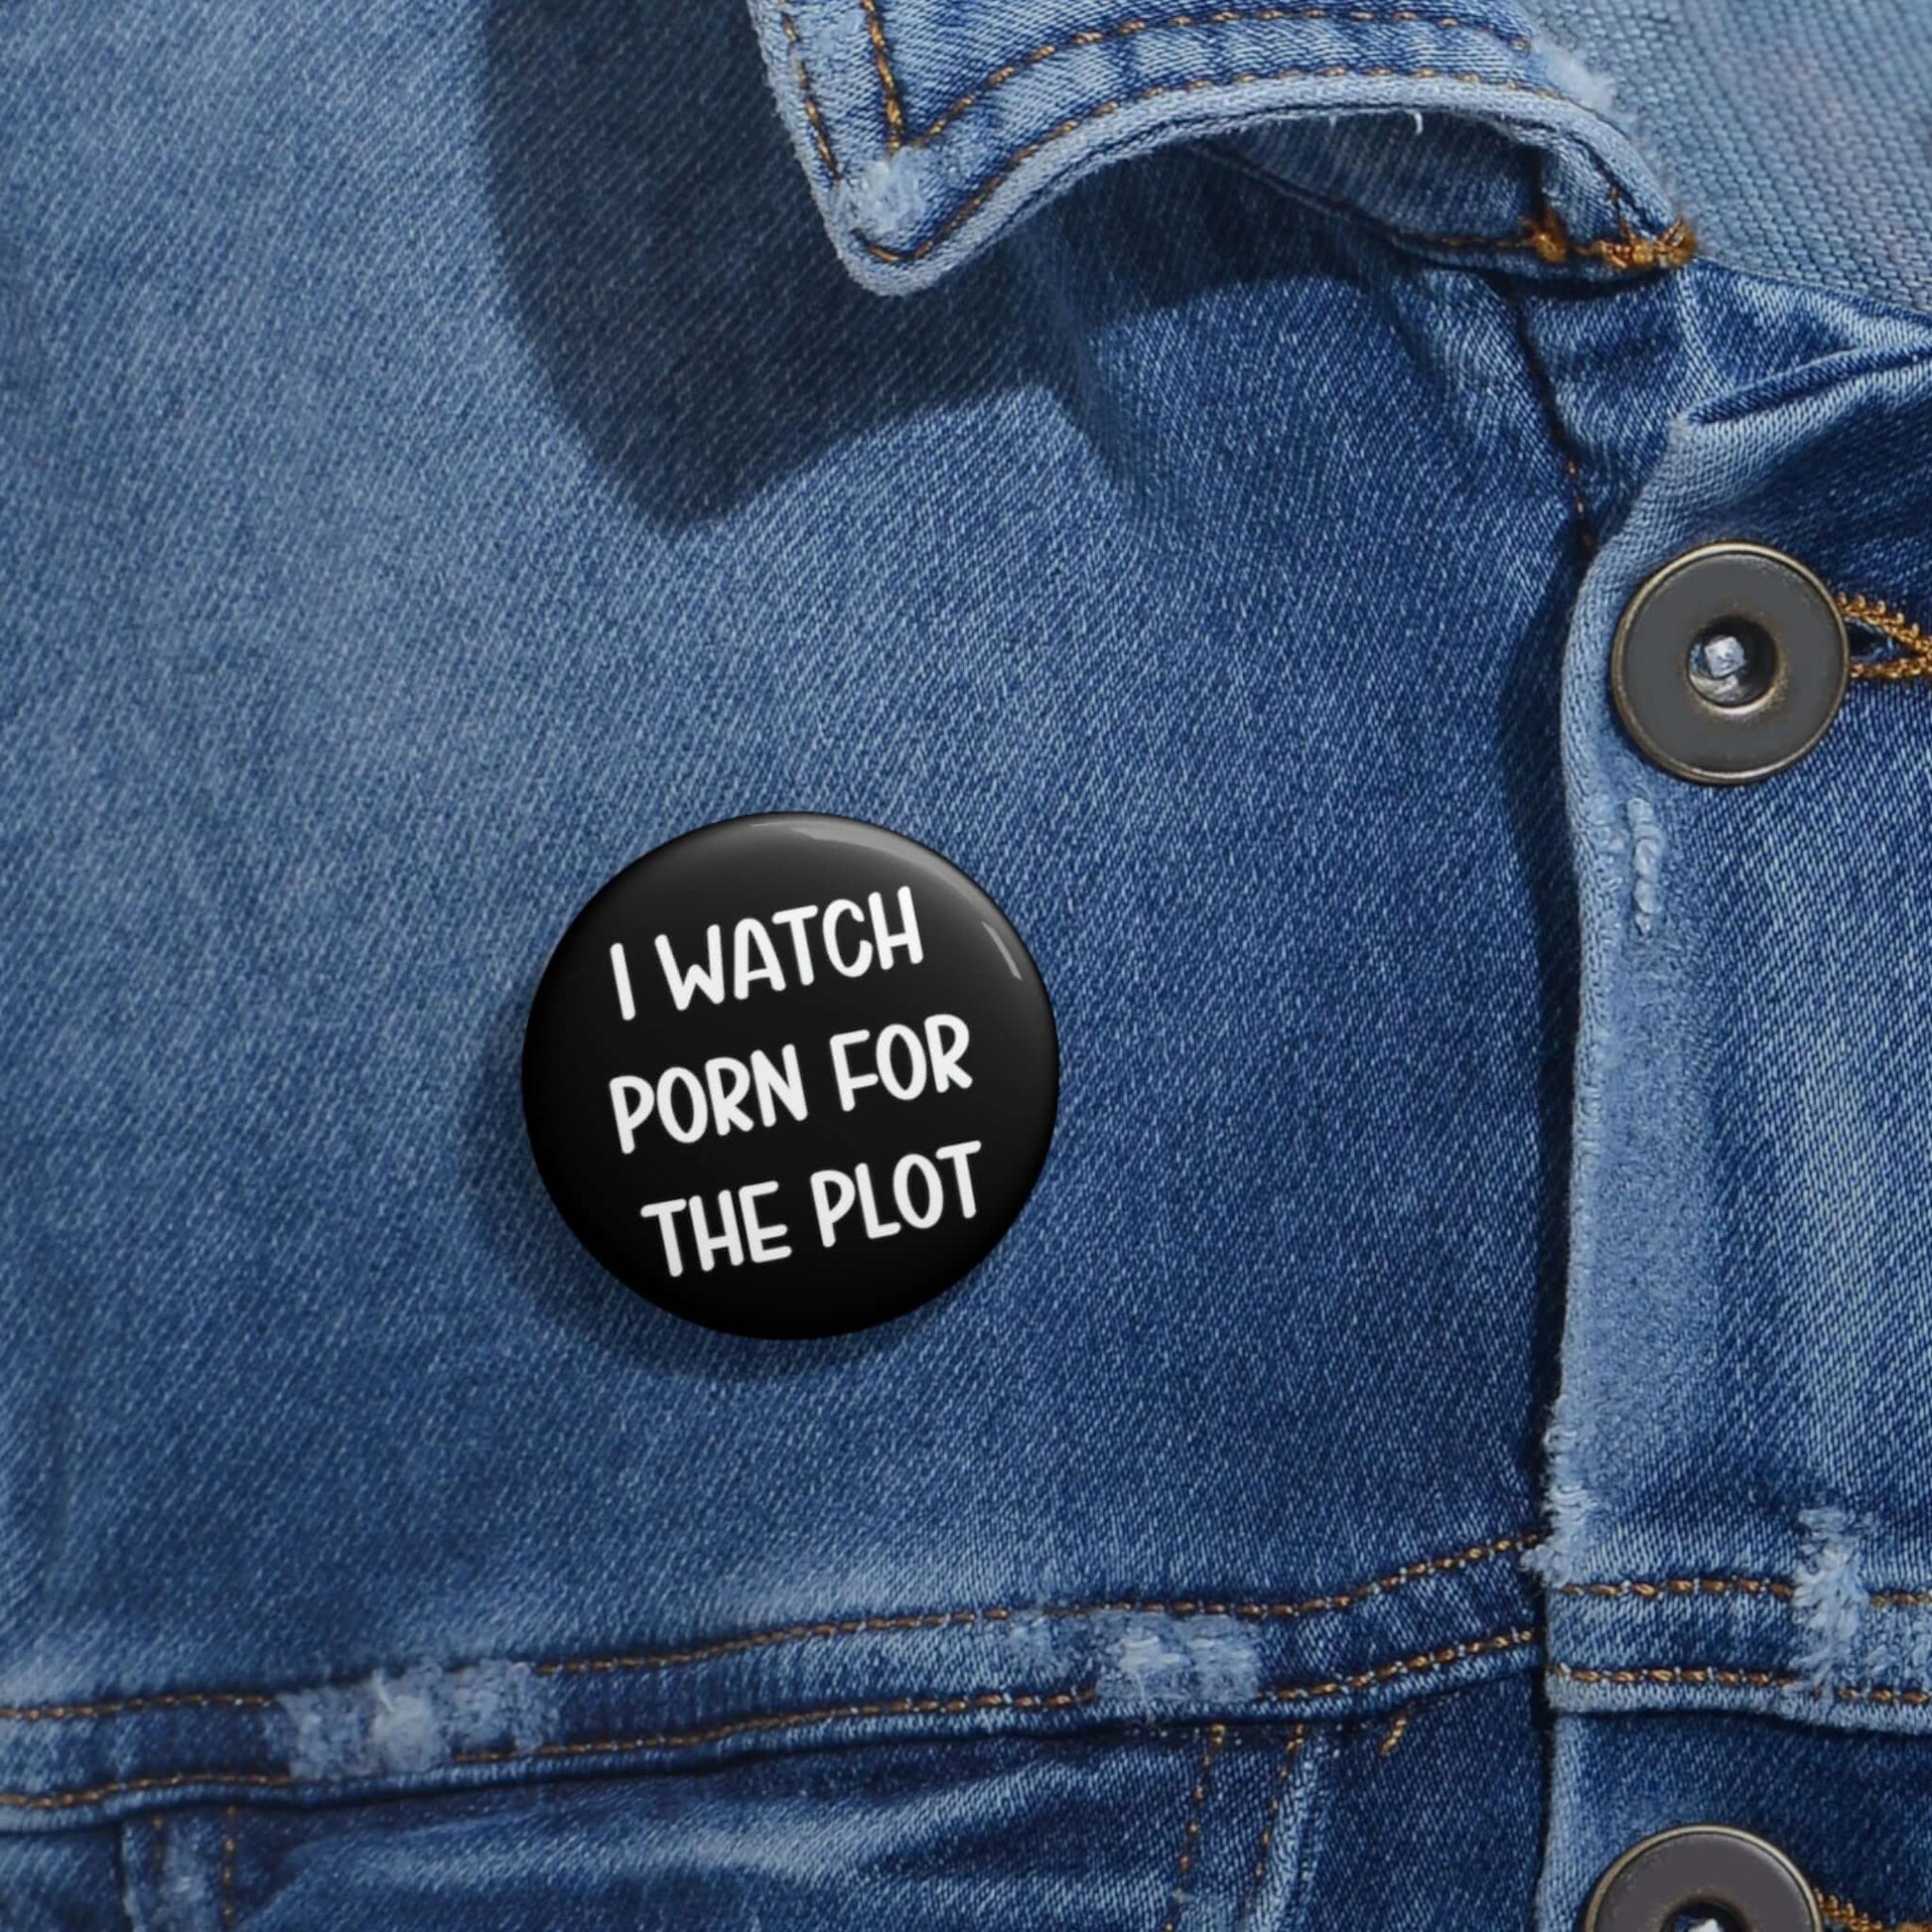 Pinback button that says I watch porn for the plot.